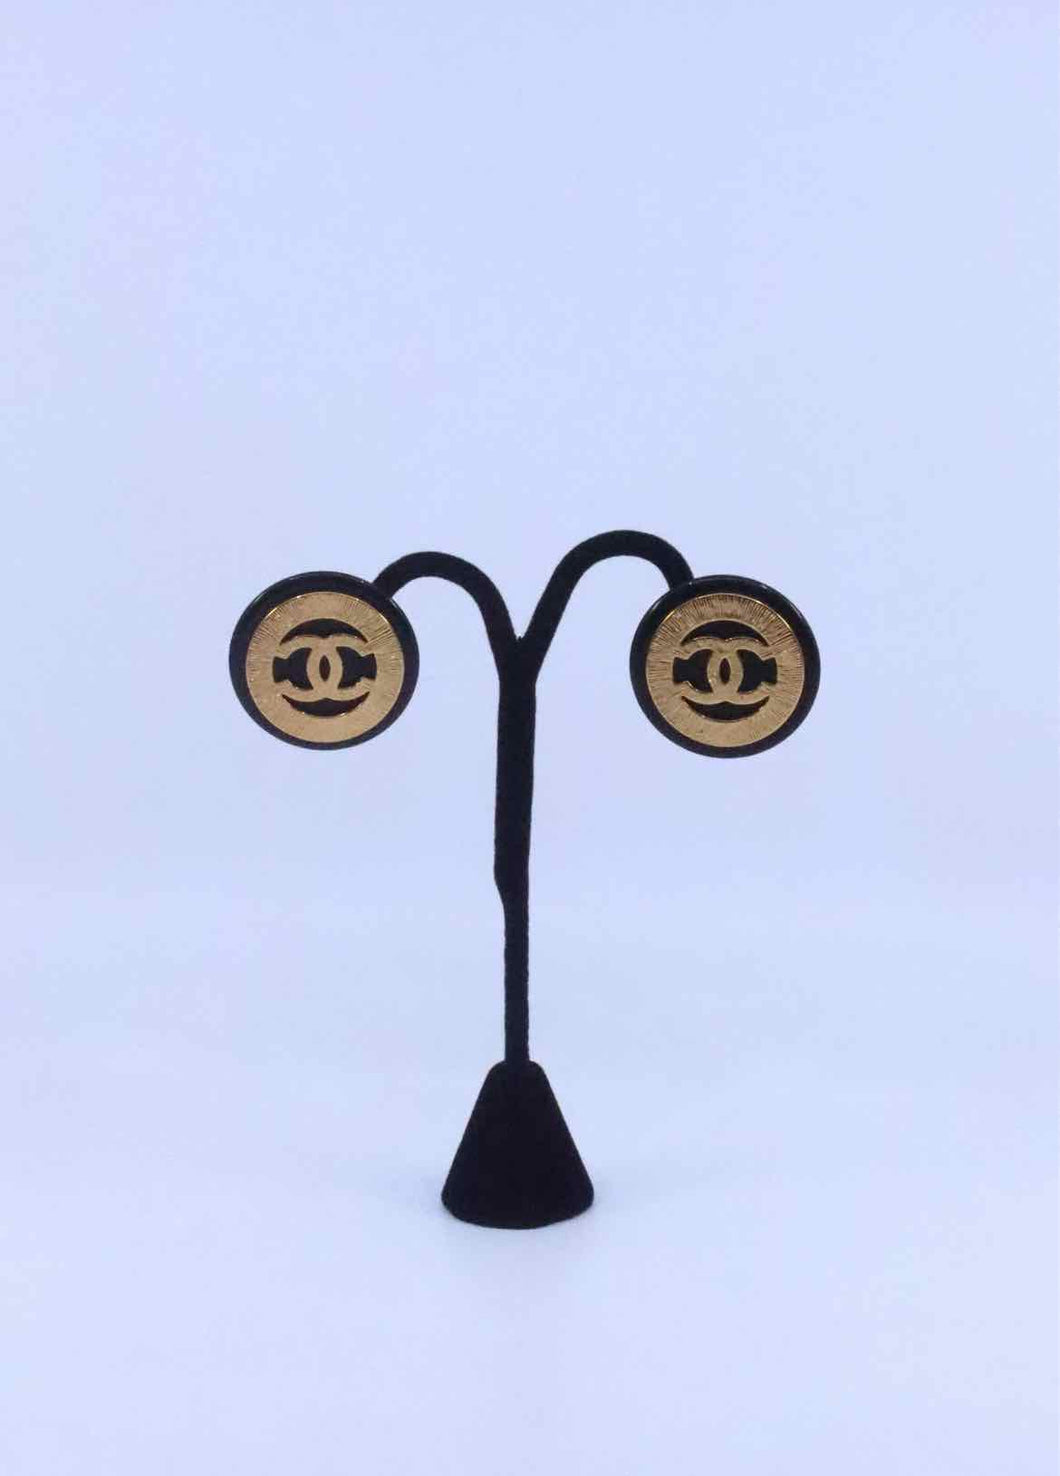 CHANEL Black, Gold Round Clip Earrings